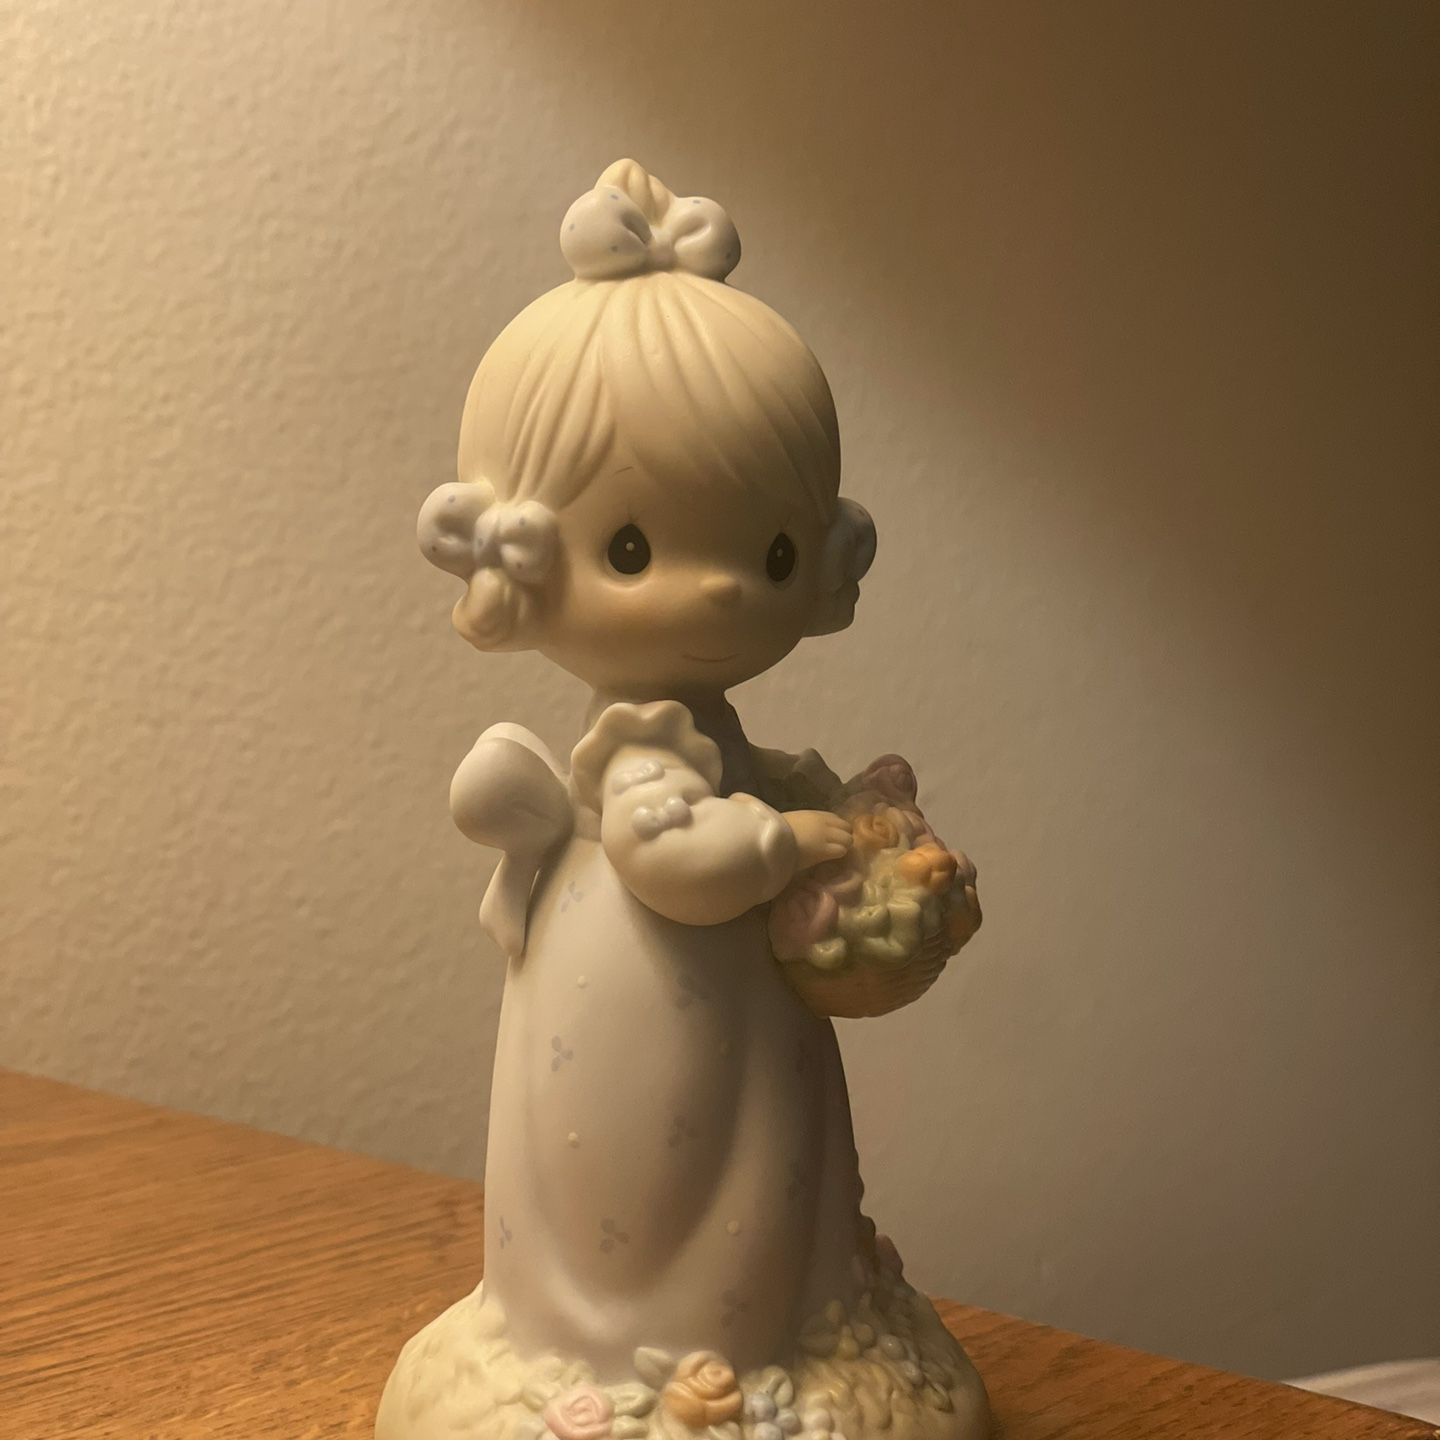 Precious Moments  "Take Time To Smell The Flowers" Figurine #(contact info removed)